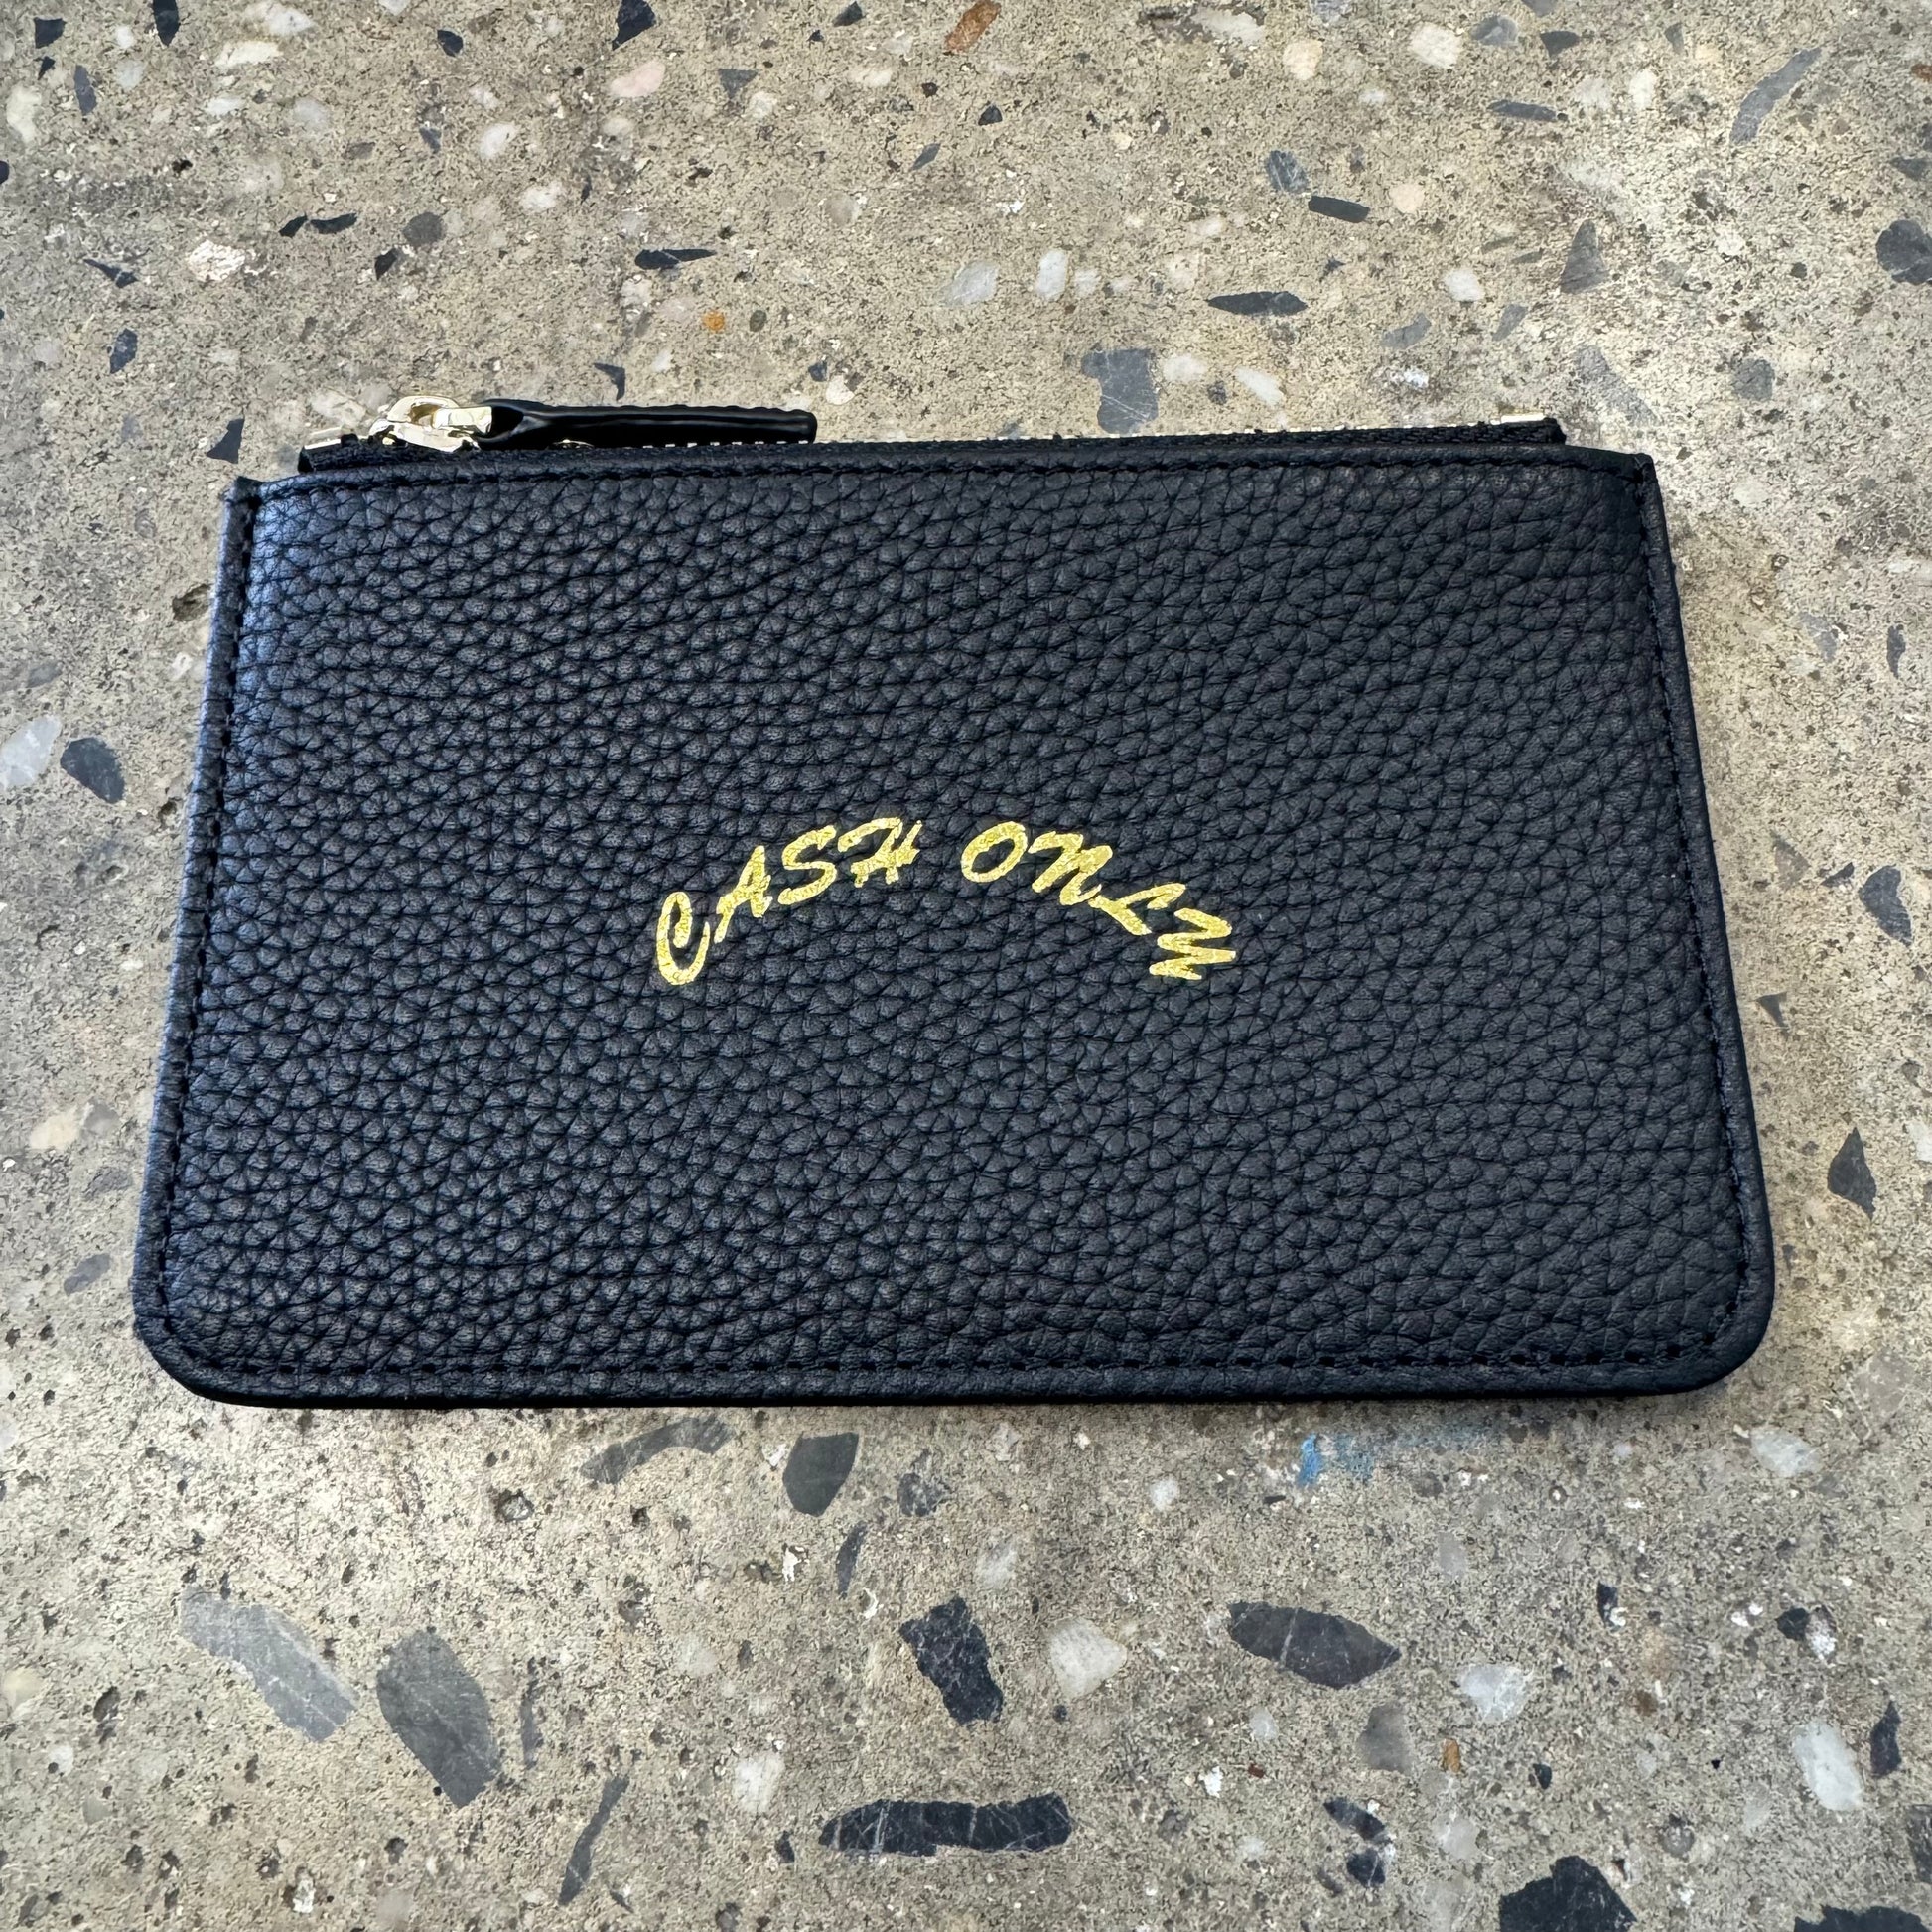 gold stamped cash only logo on middle of leather zip wallet